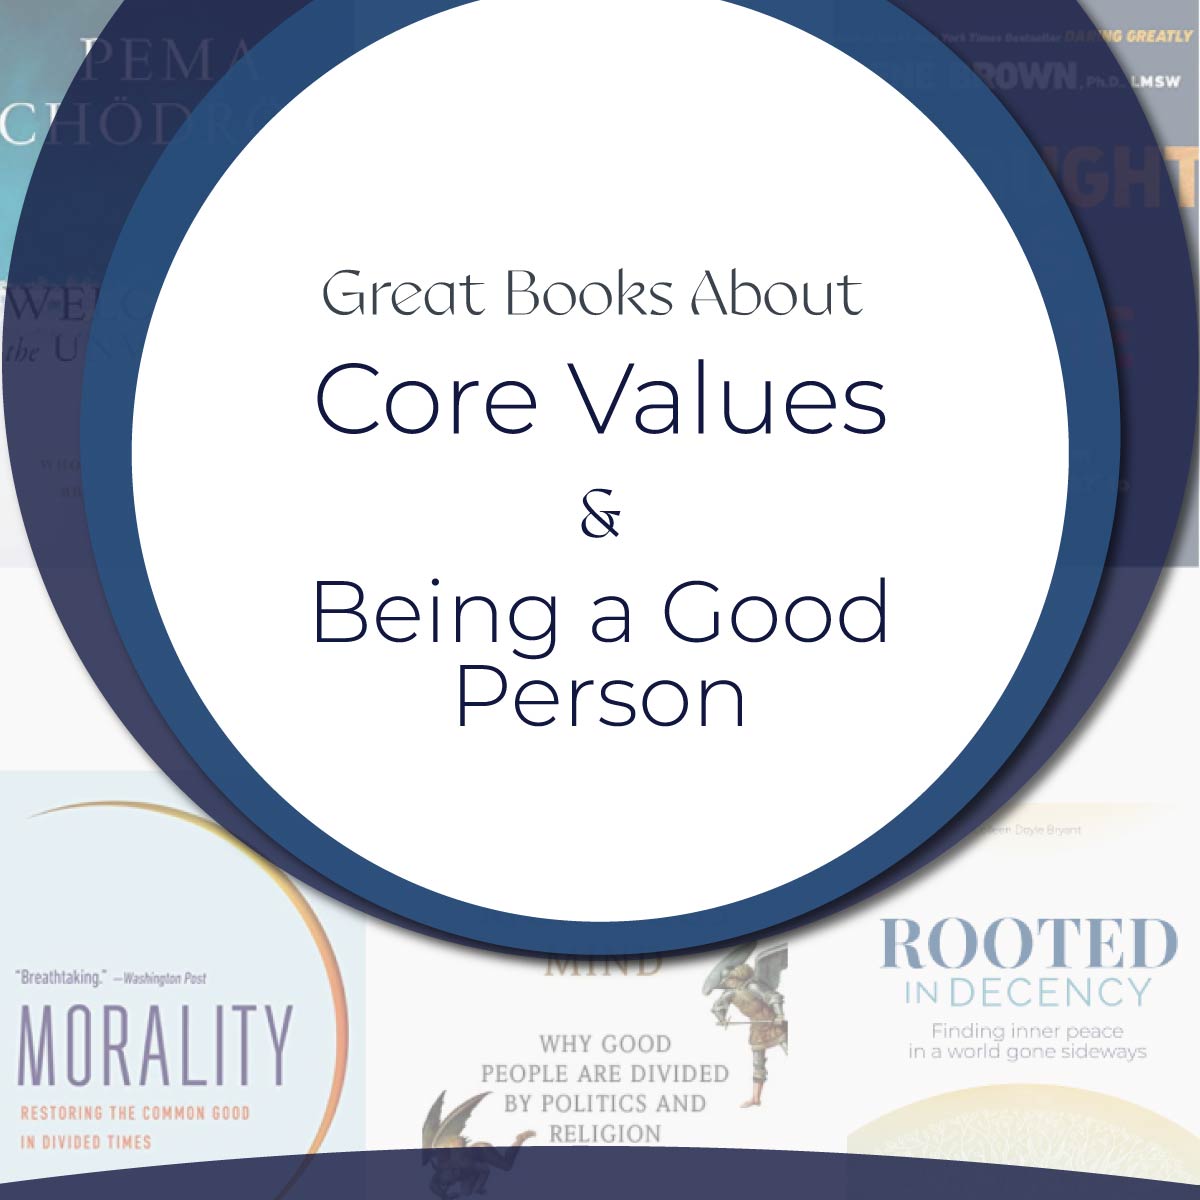 Books about core values